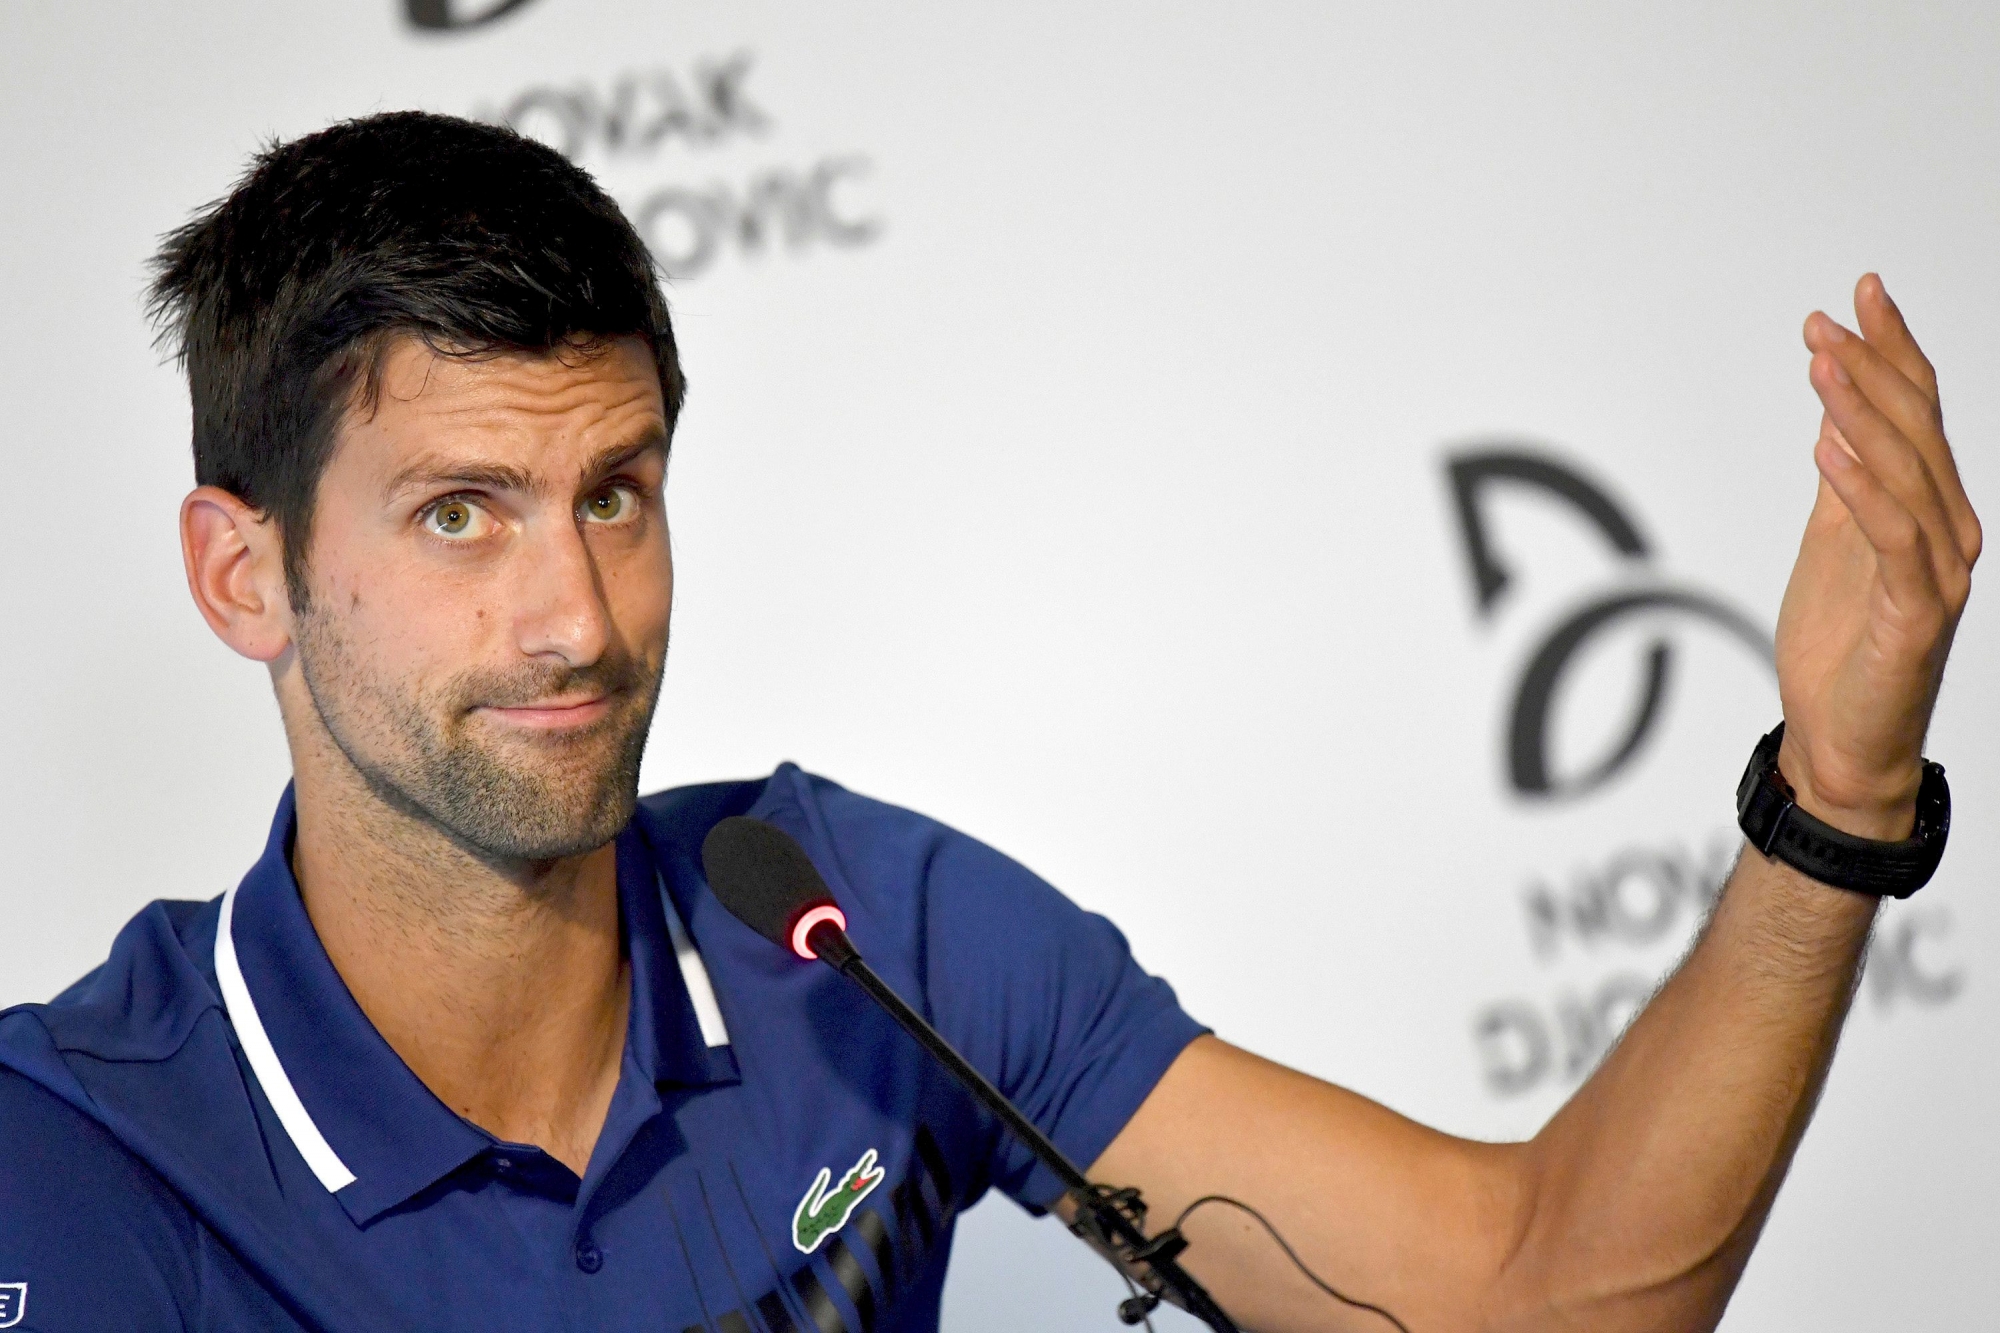 Tennis player Novak Djokovic gestures,  during a press conference in Belgrade, Serbia, Wednesday, July 26, 2017.  Djokovic will sit out the rest of this season because of an injured right elbow, meaning he will miss the U.S. Open and end his streak of participating in 51 consecutive Grand Slam tournaments. (Andrej Isakovic, Pool Photo via AP) Serbia Djokovic Season Over